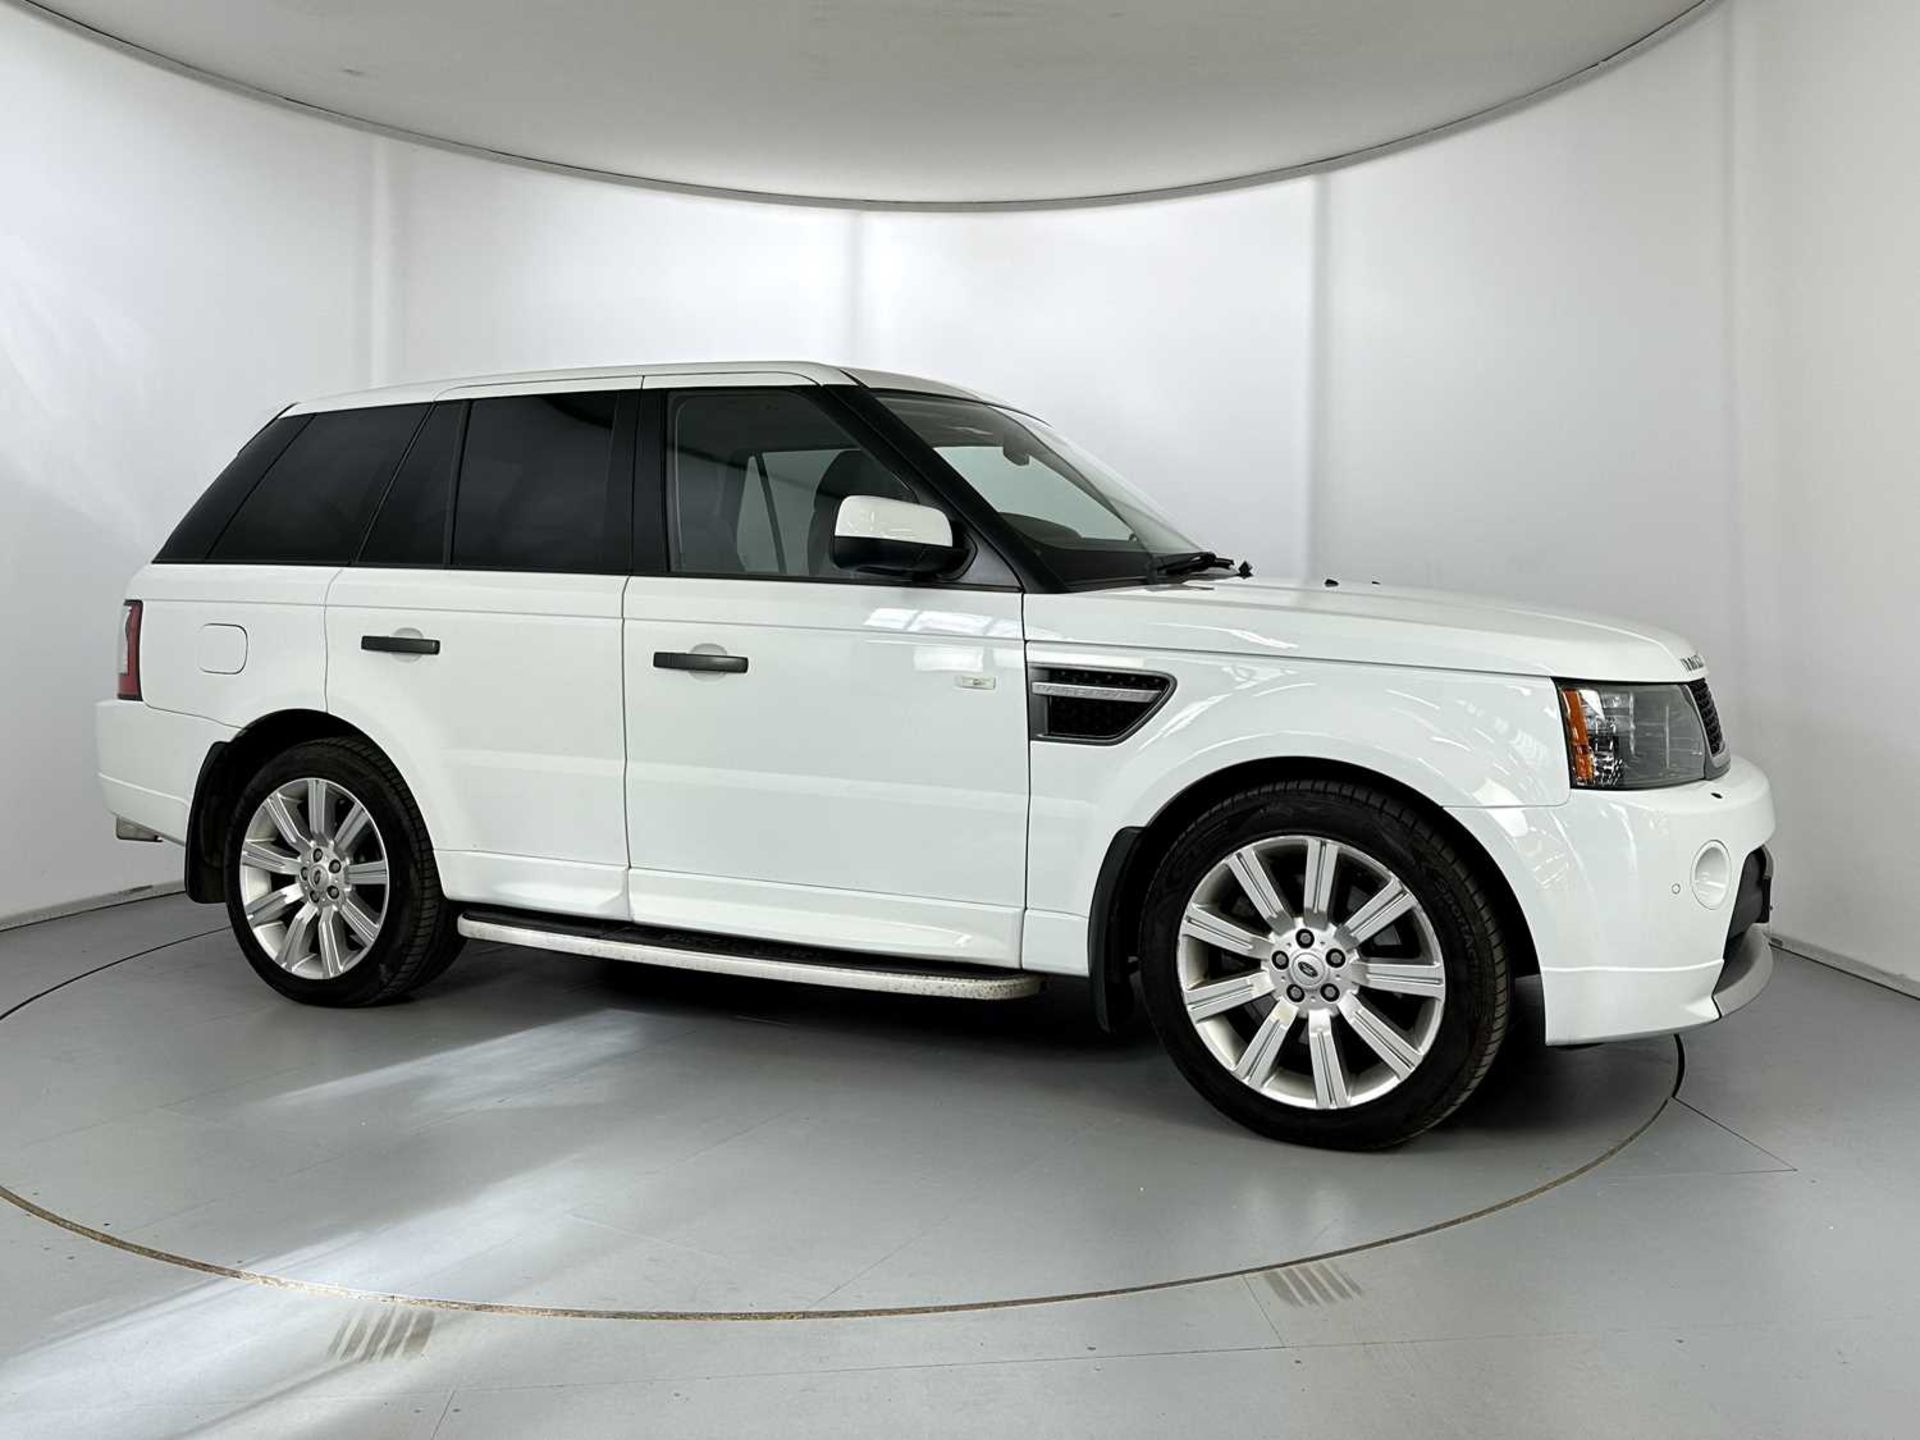 2011 Land Rover Range Rover Sport Stormer Edition  - Image 12 of 33